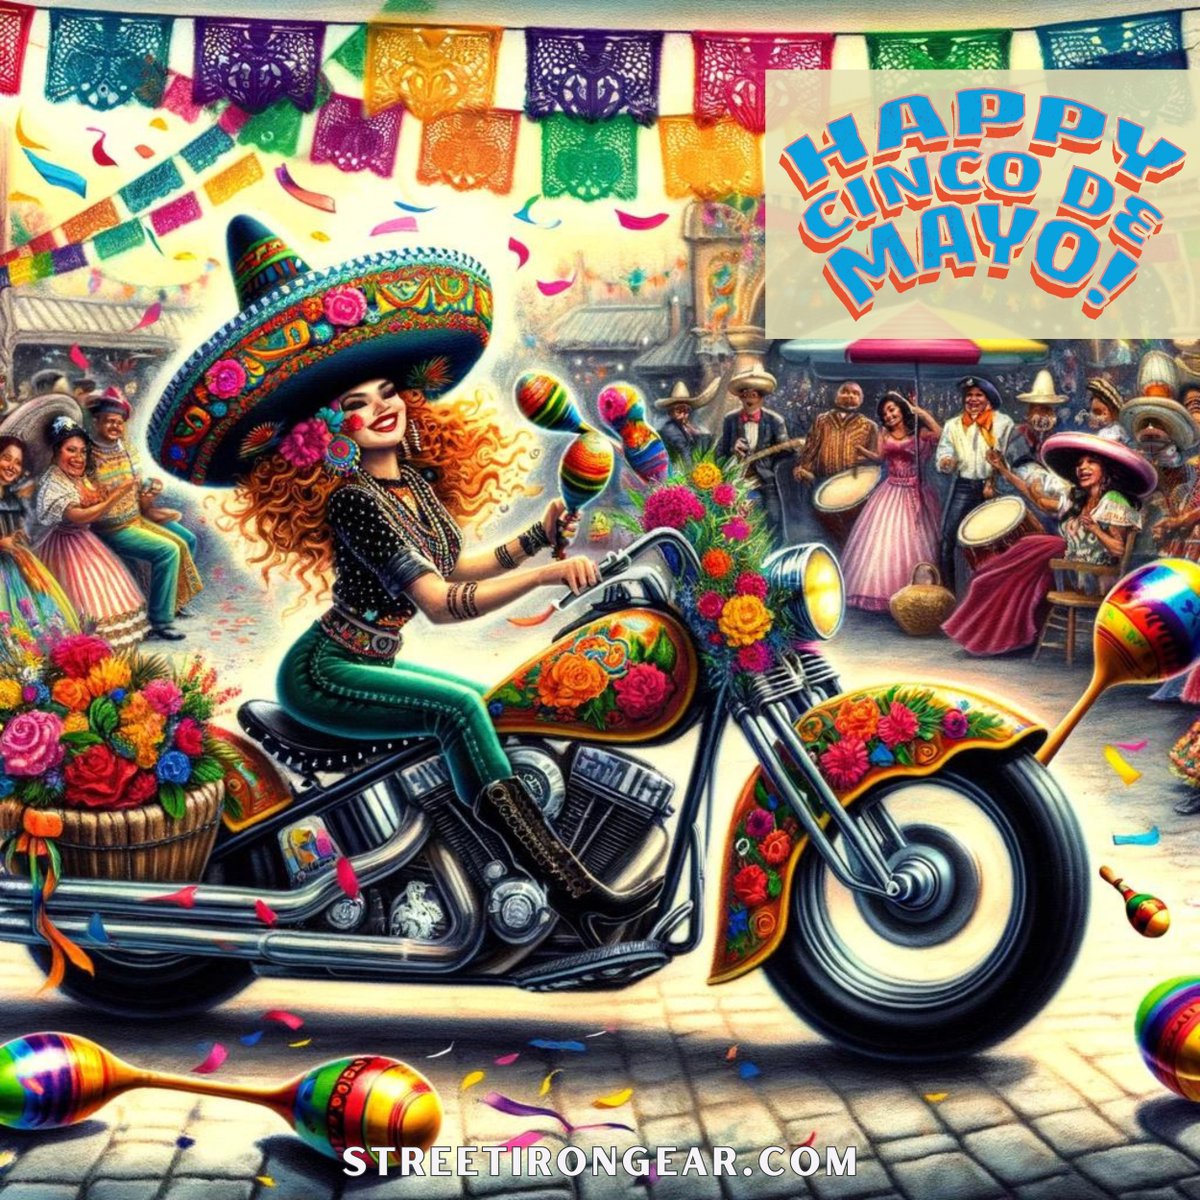 Celebrate Cinco de Mayo in style! 🏍️💃 Our fearless motorcyclist is taking the festive spirit to the streets, decked out in vibrant colors and surrounded by the joy of music and dance. 

#CincoDeMayo #FiestaTime #MotorcycleDiaries #CelebrateCulture #VivaMexico #StreetIronGear